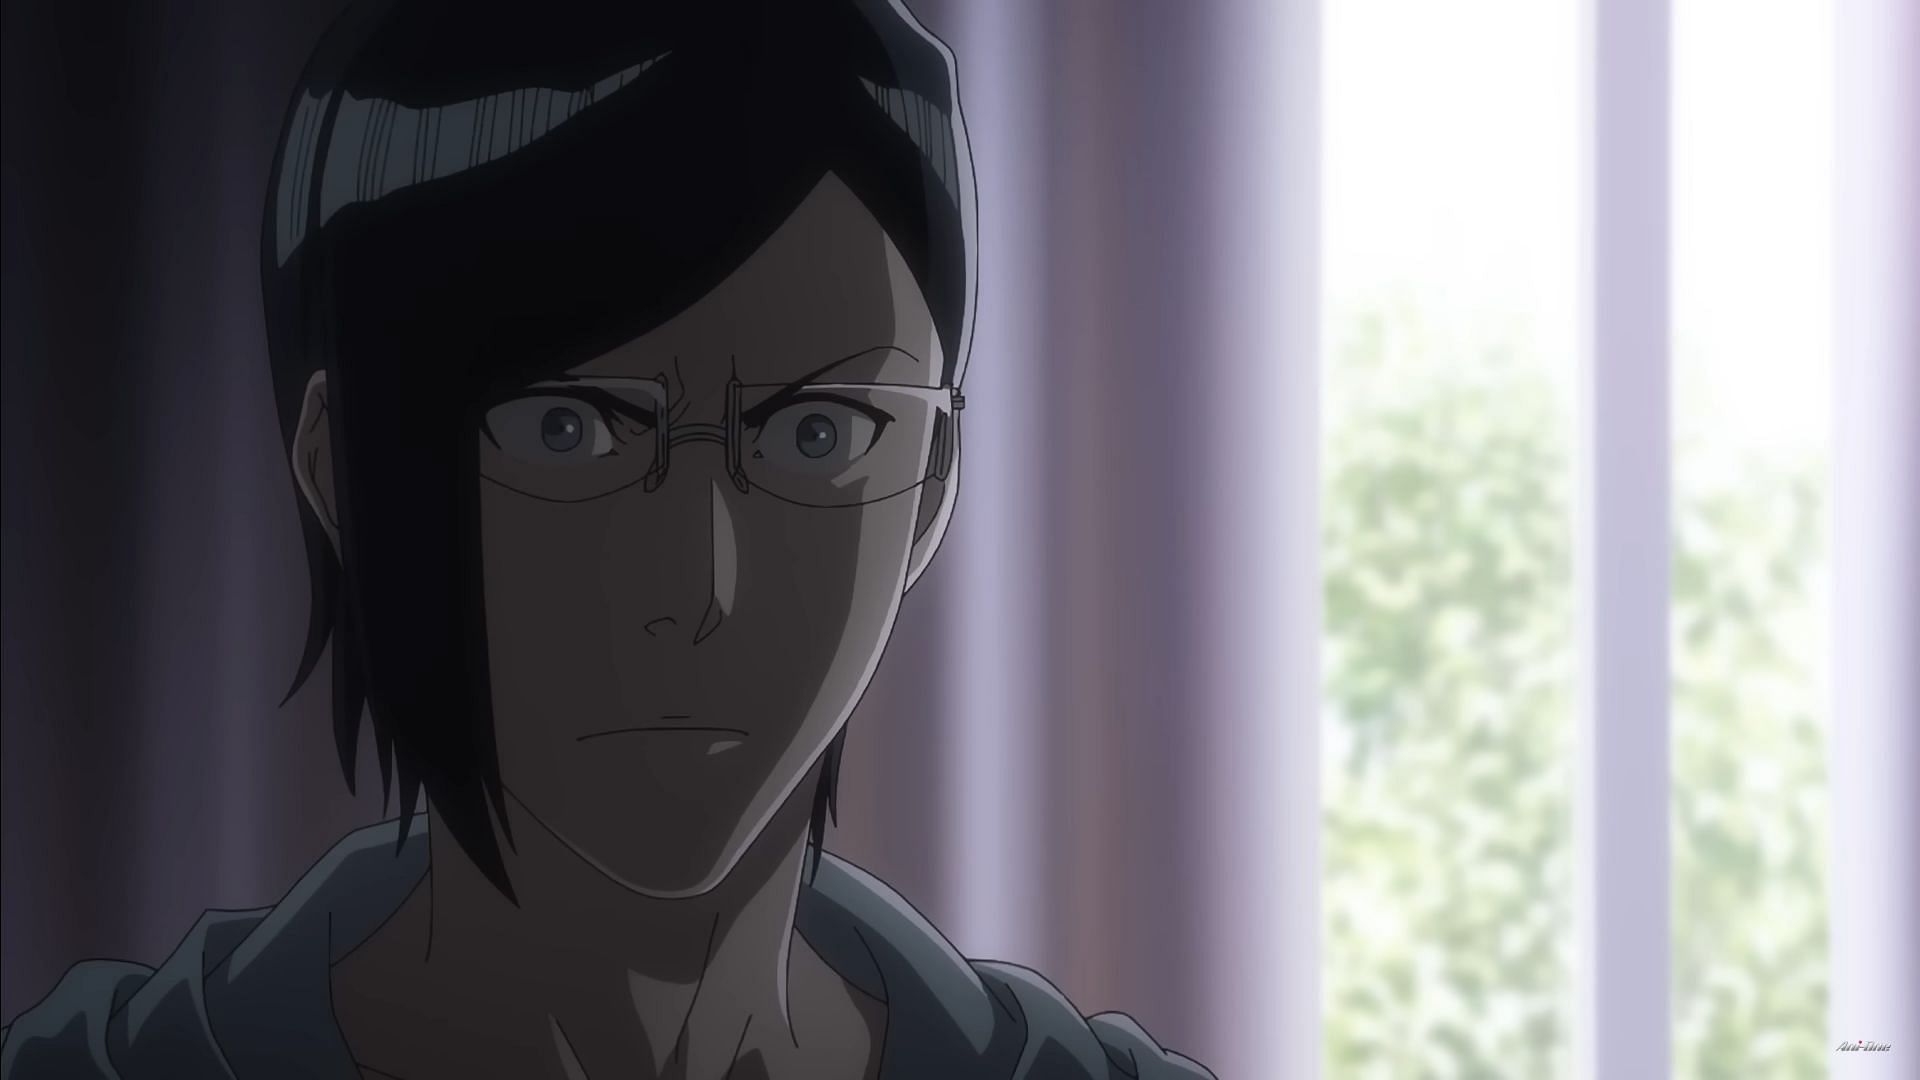 Ishida Uryu is angry at his dad for hiding secrets about the Quincy from him (Image via Studio Pierrot)